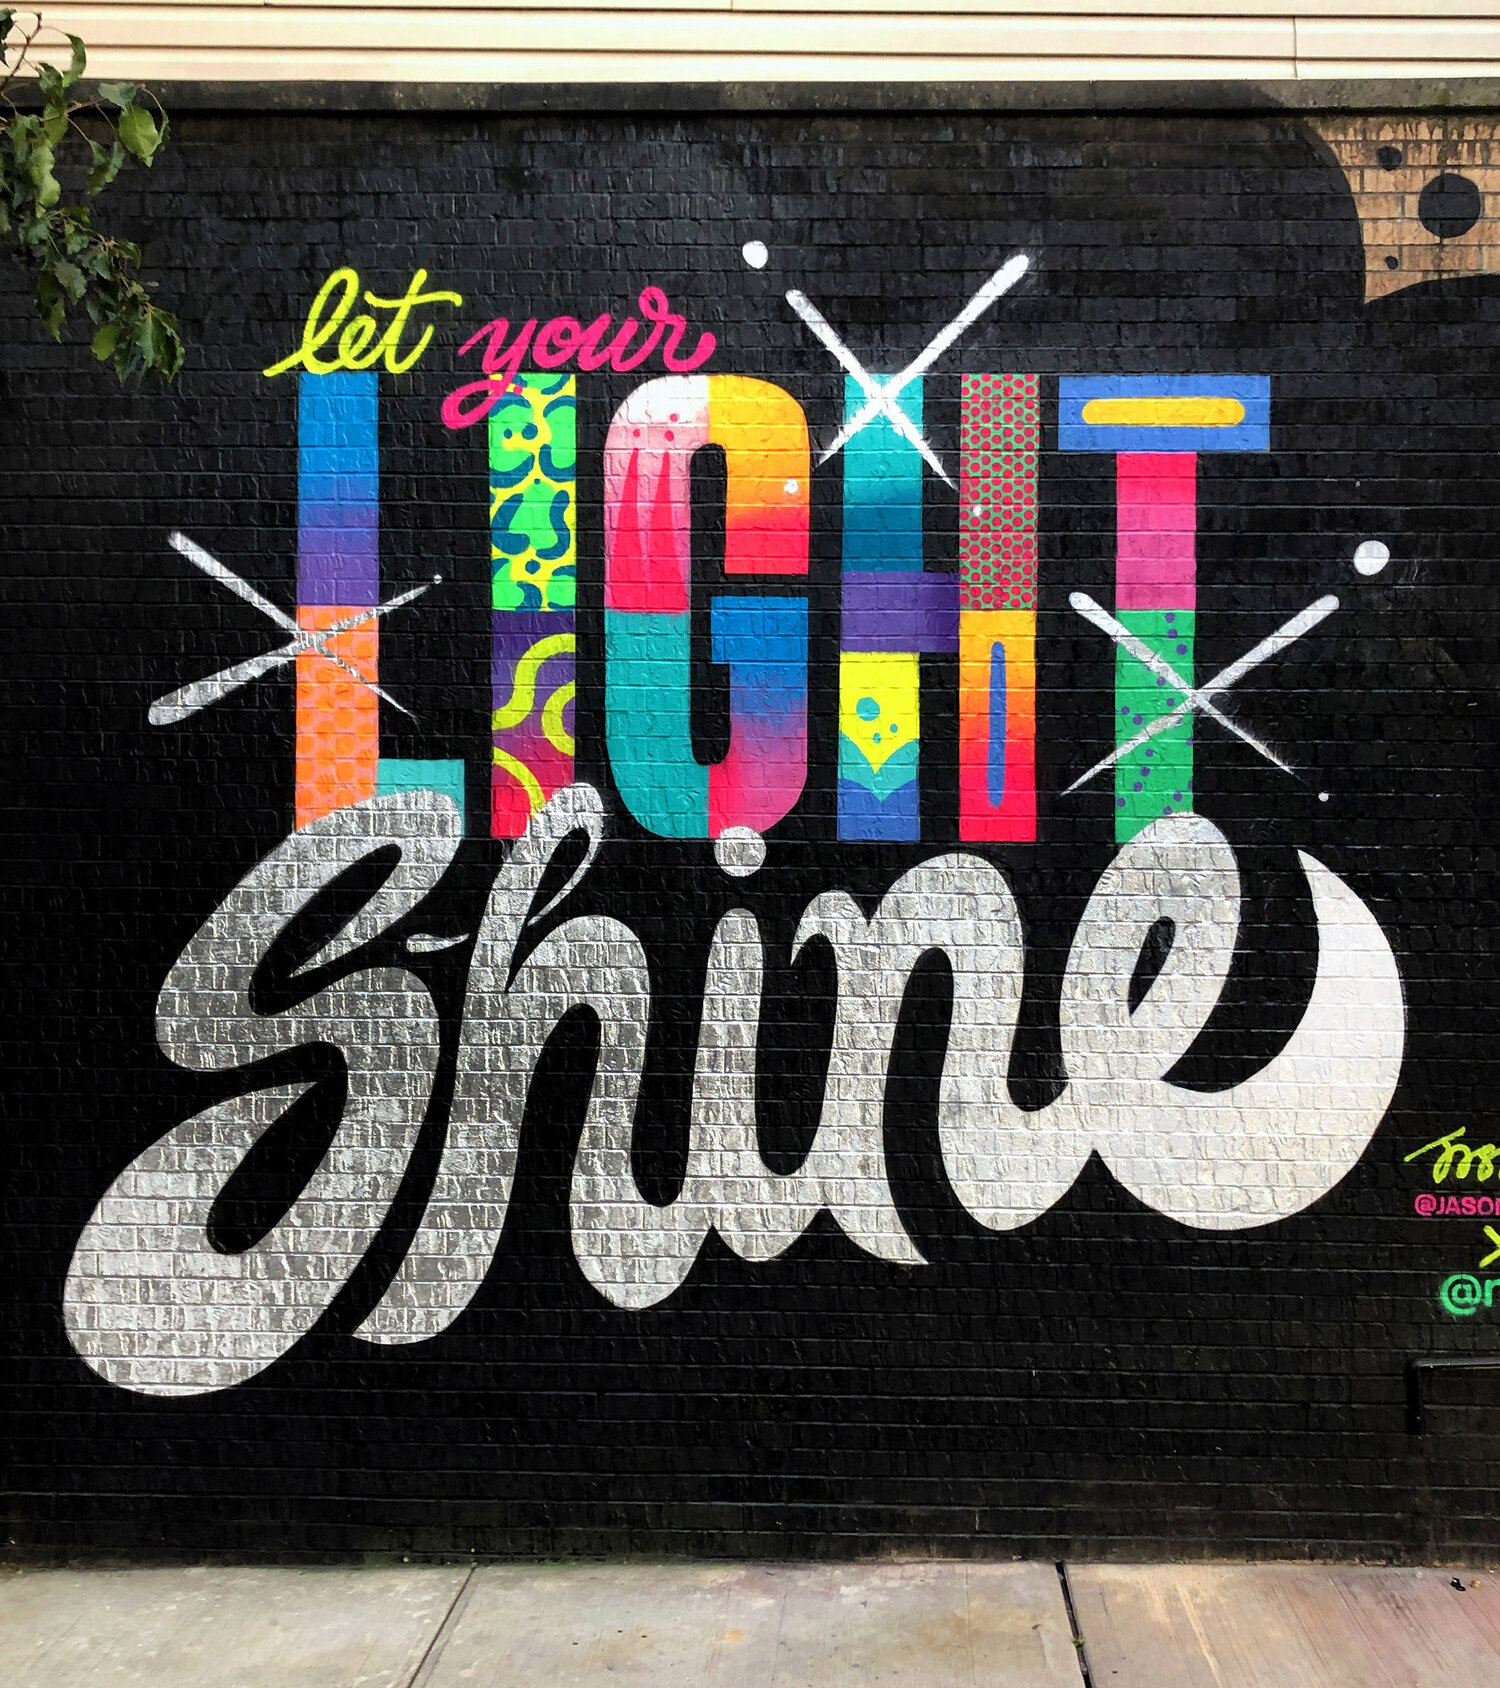 Let your light shine by Jason Naylor